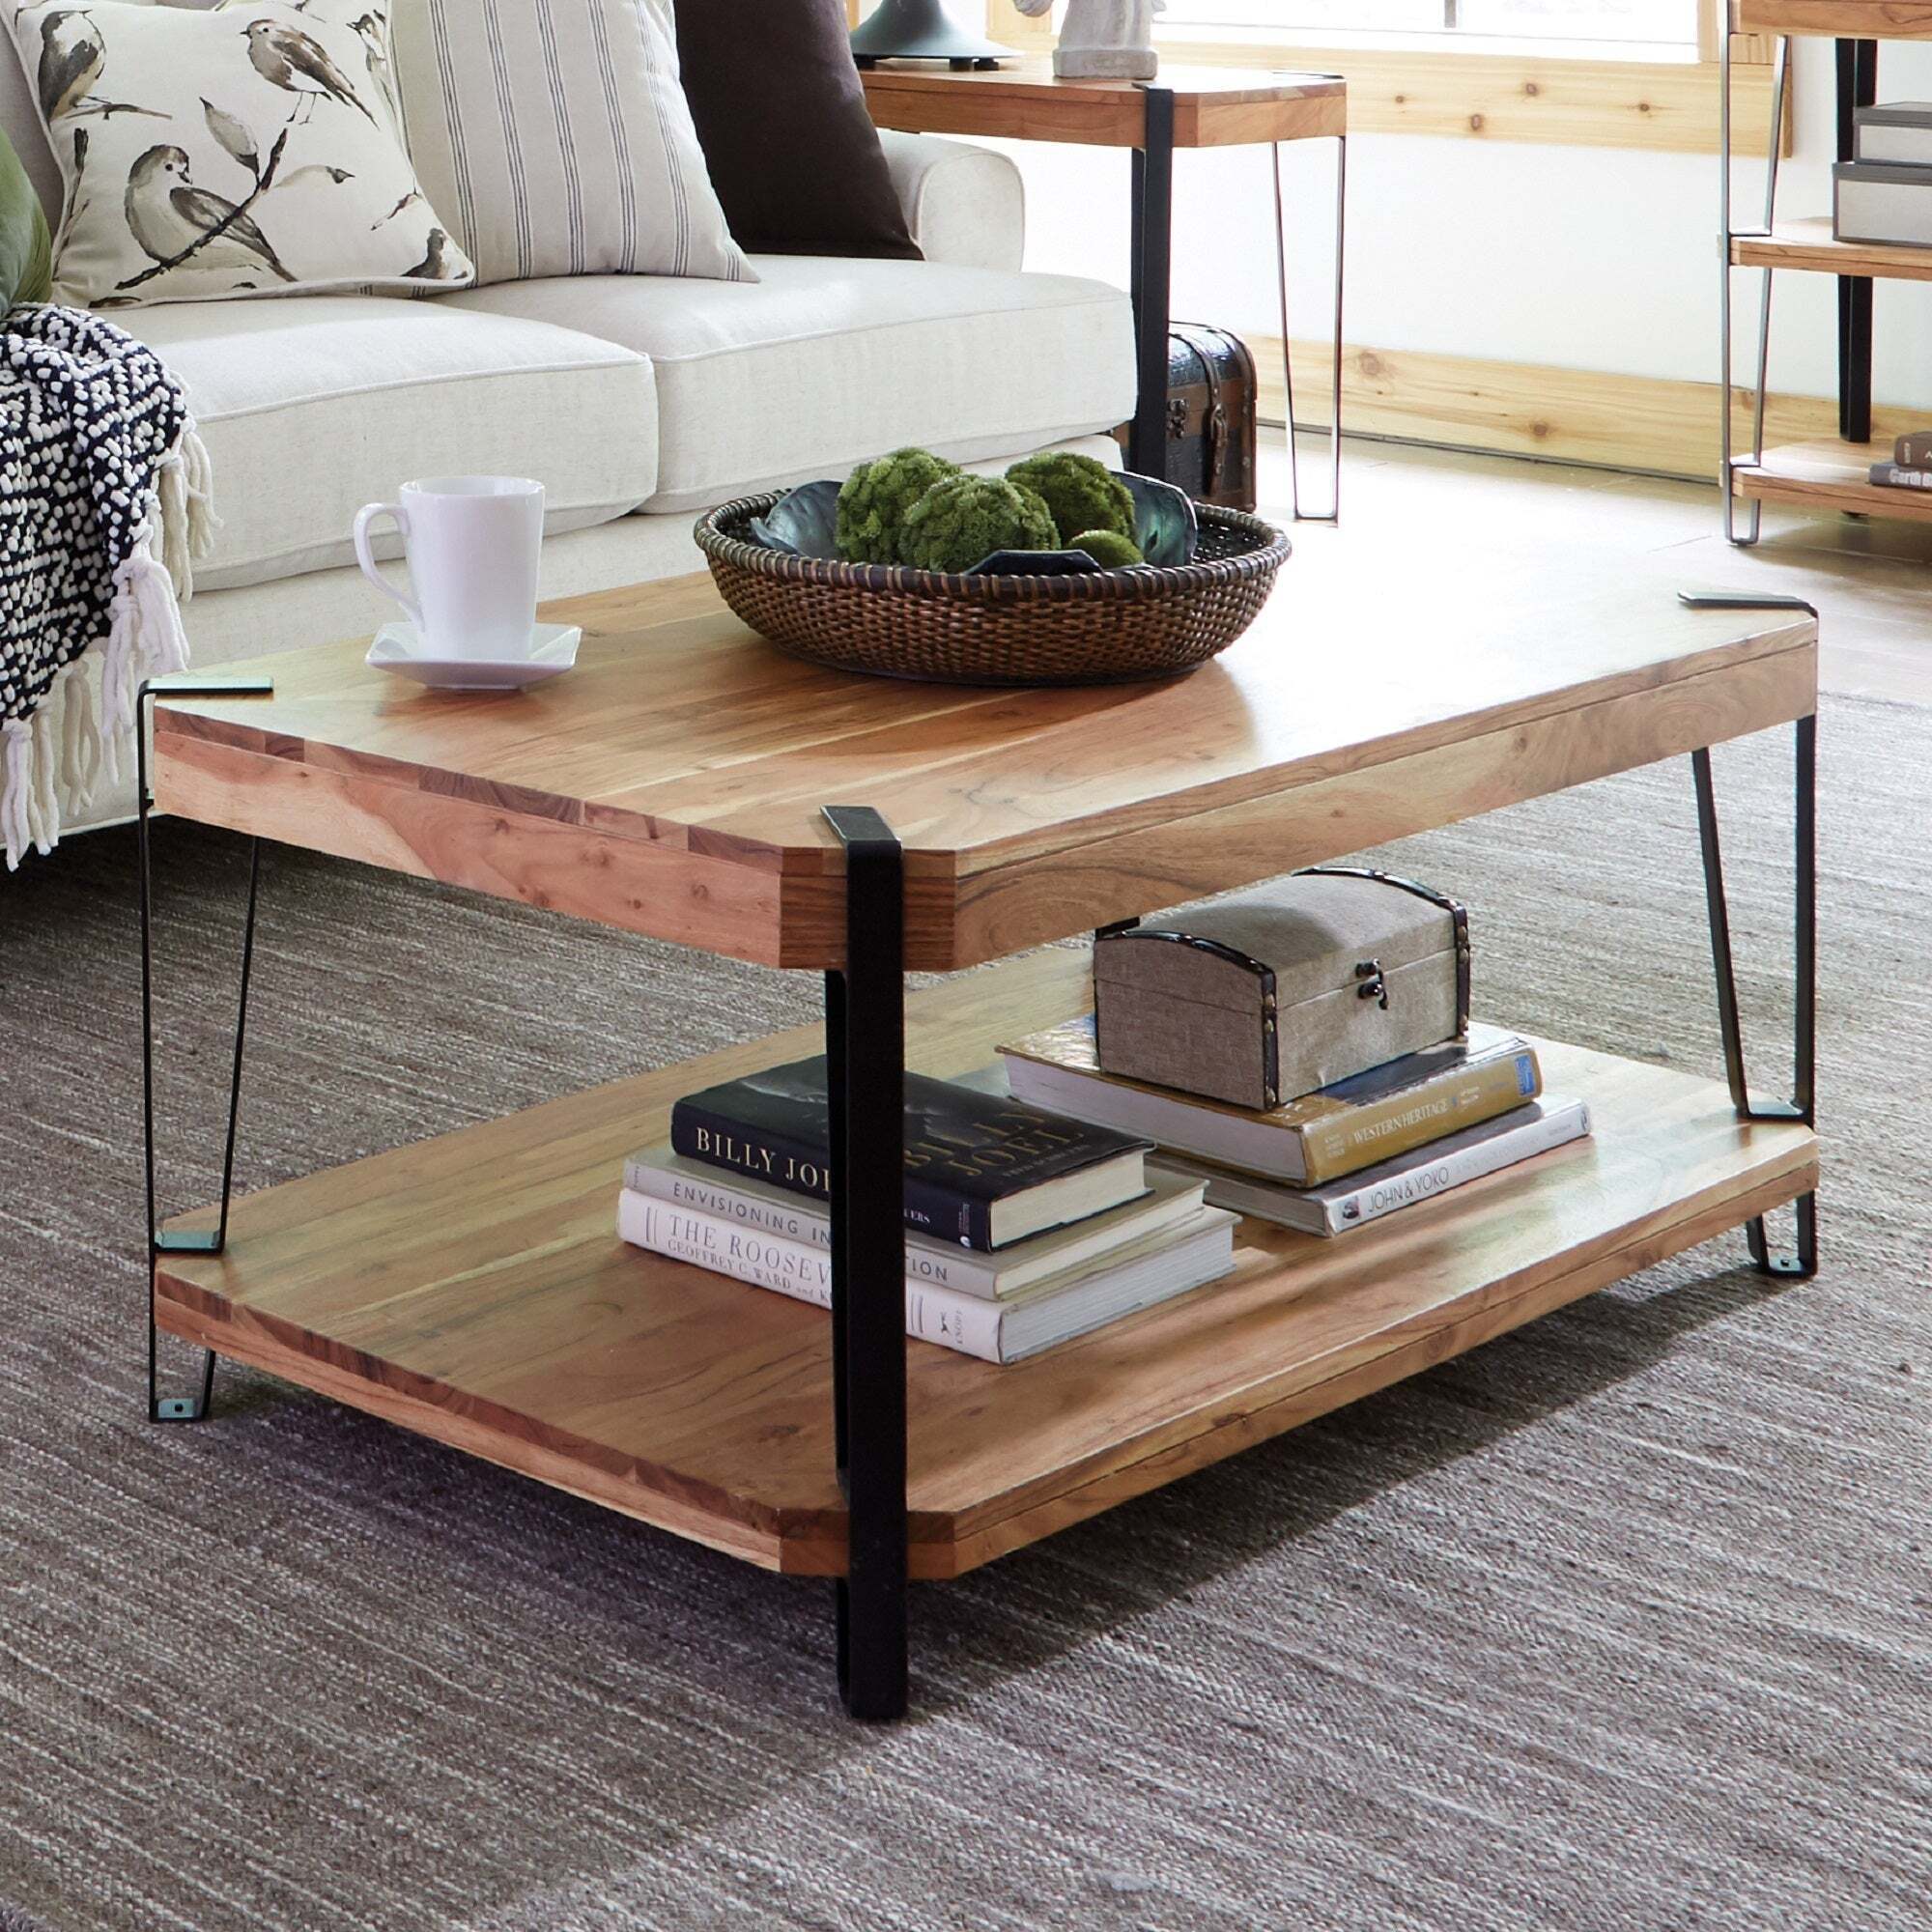 A wooden coffee table with storage underneath